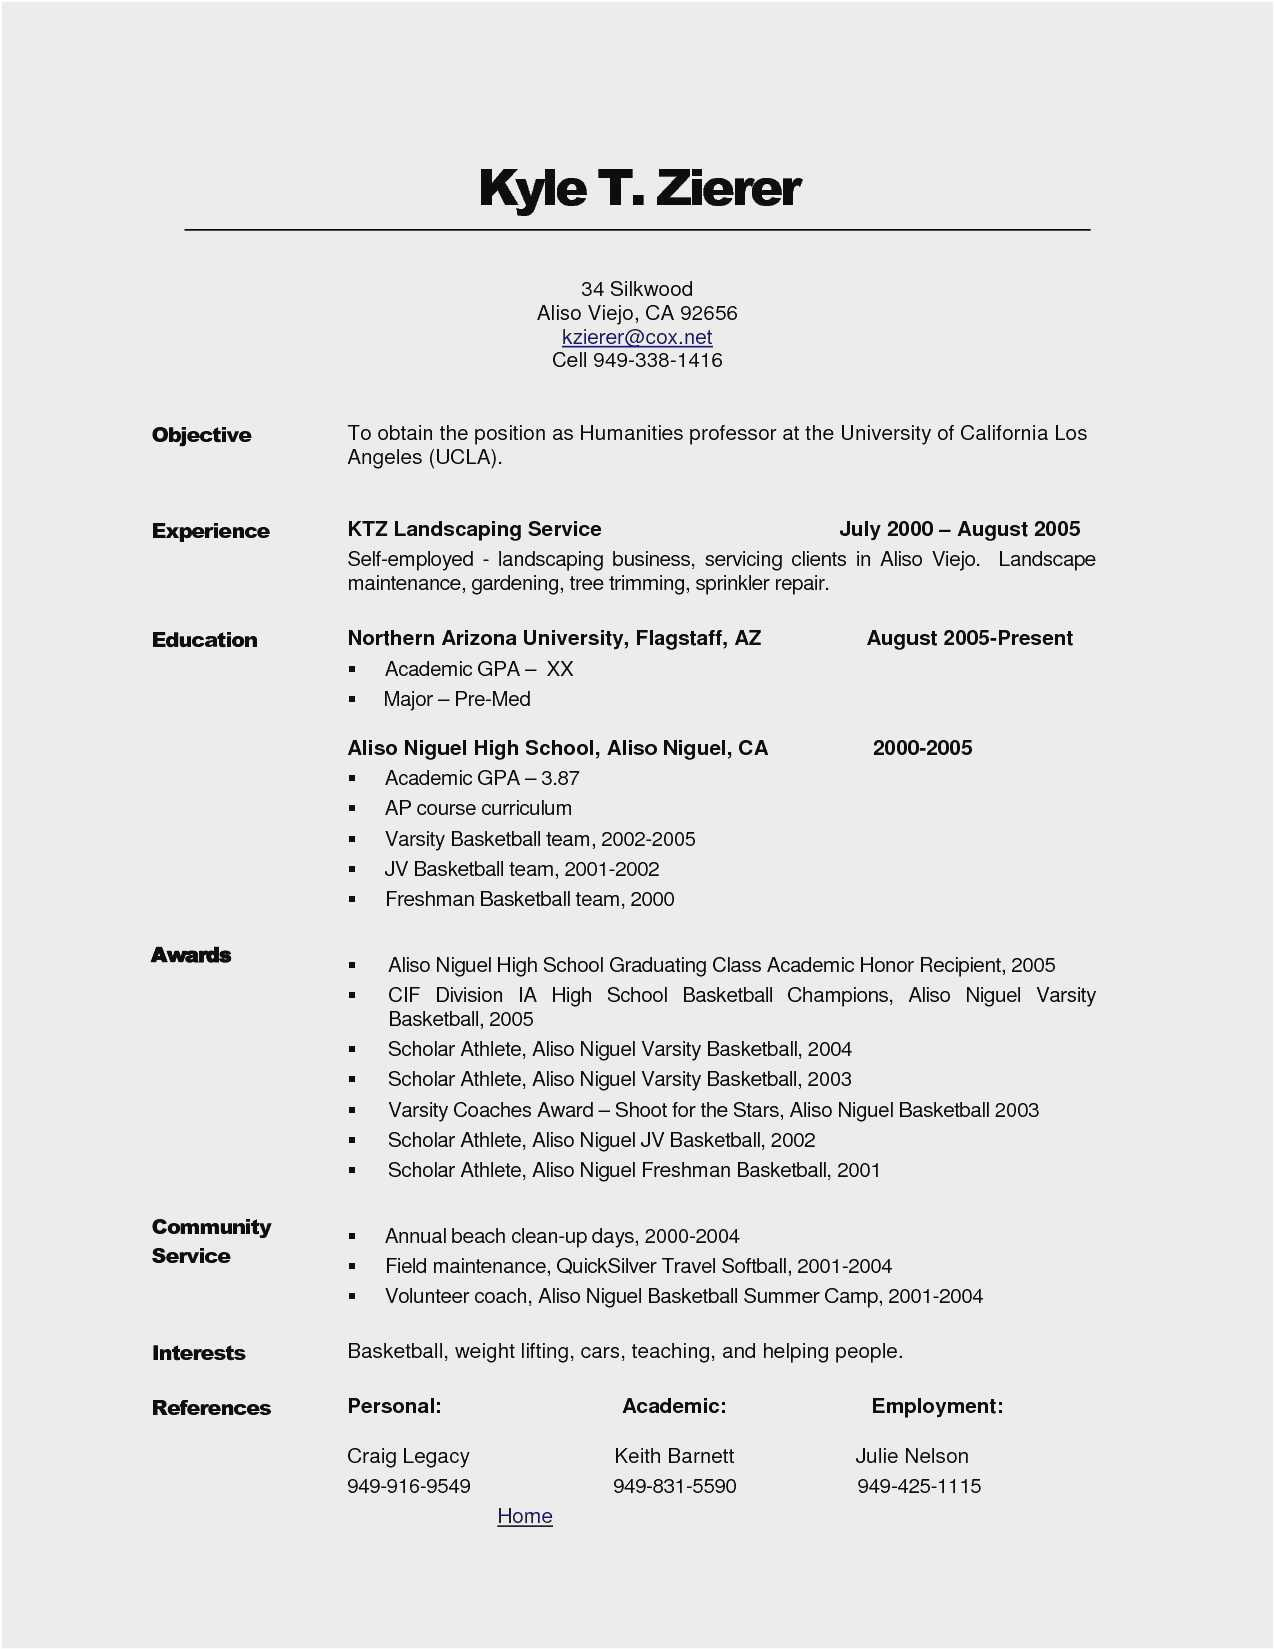 Resume Objective Samples for High School Students Free Collection 56 High School Resume Objective New